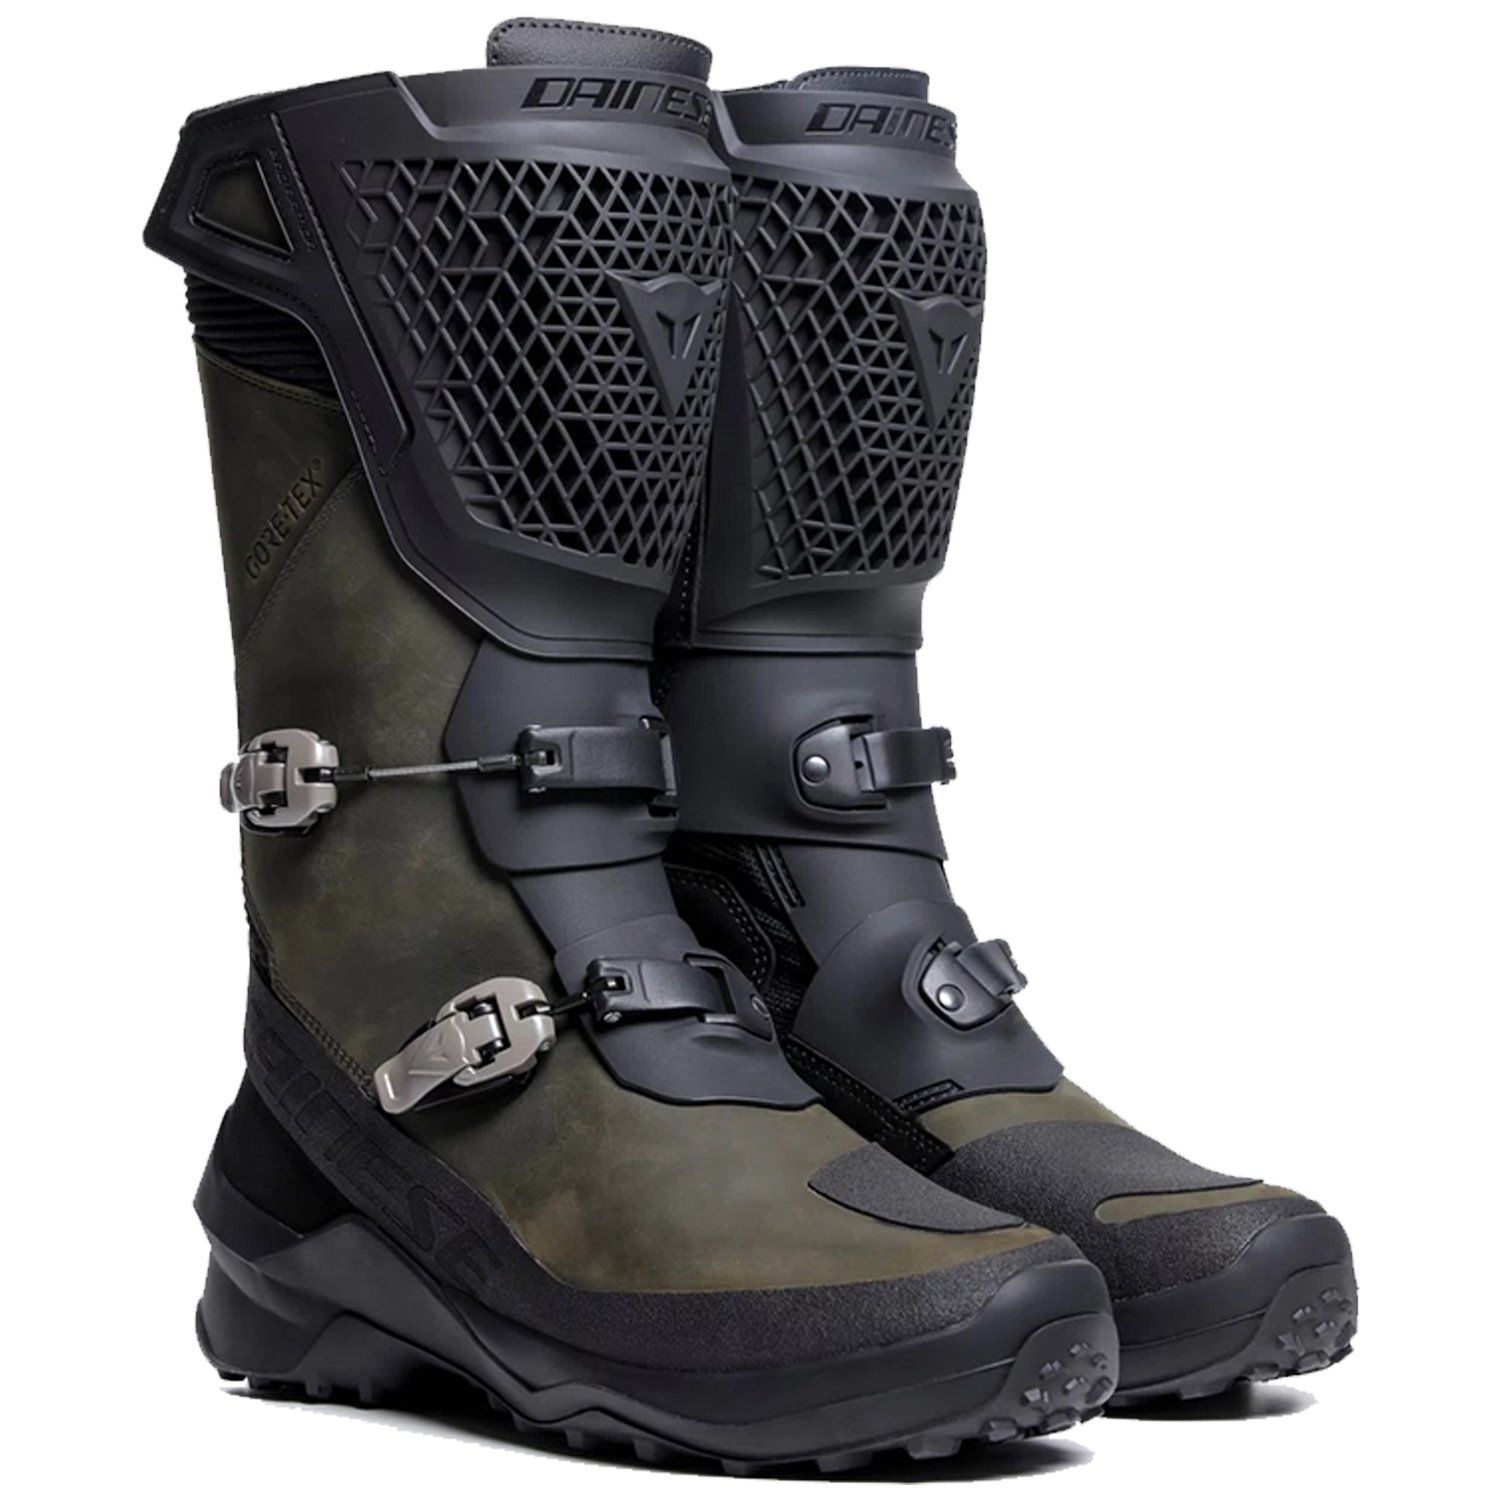 Image of Dainese Seeker Gore-Tex Boots Black Army Green Size 42 ID 8051019544506